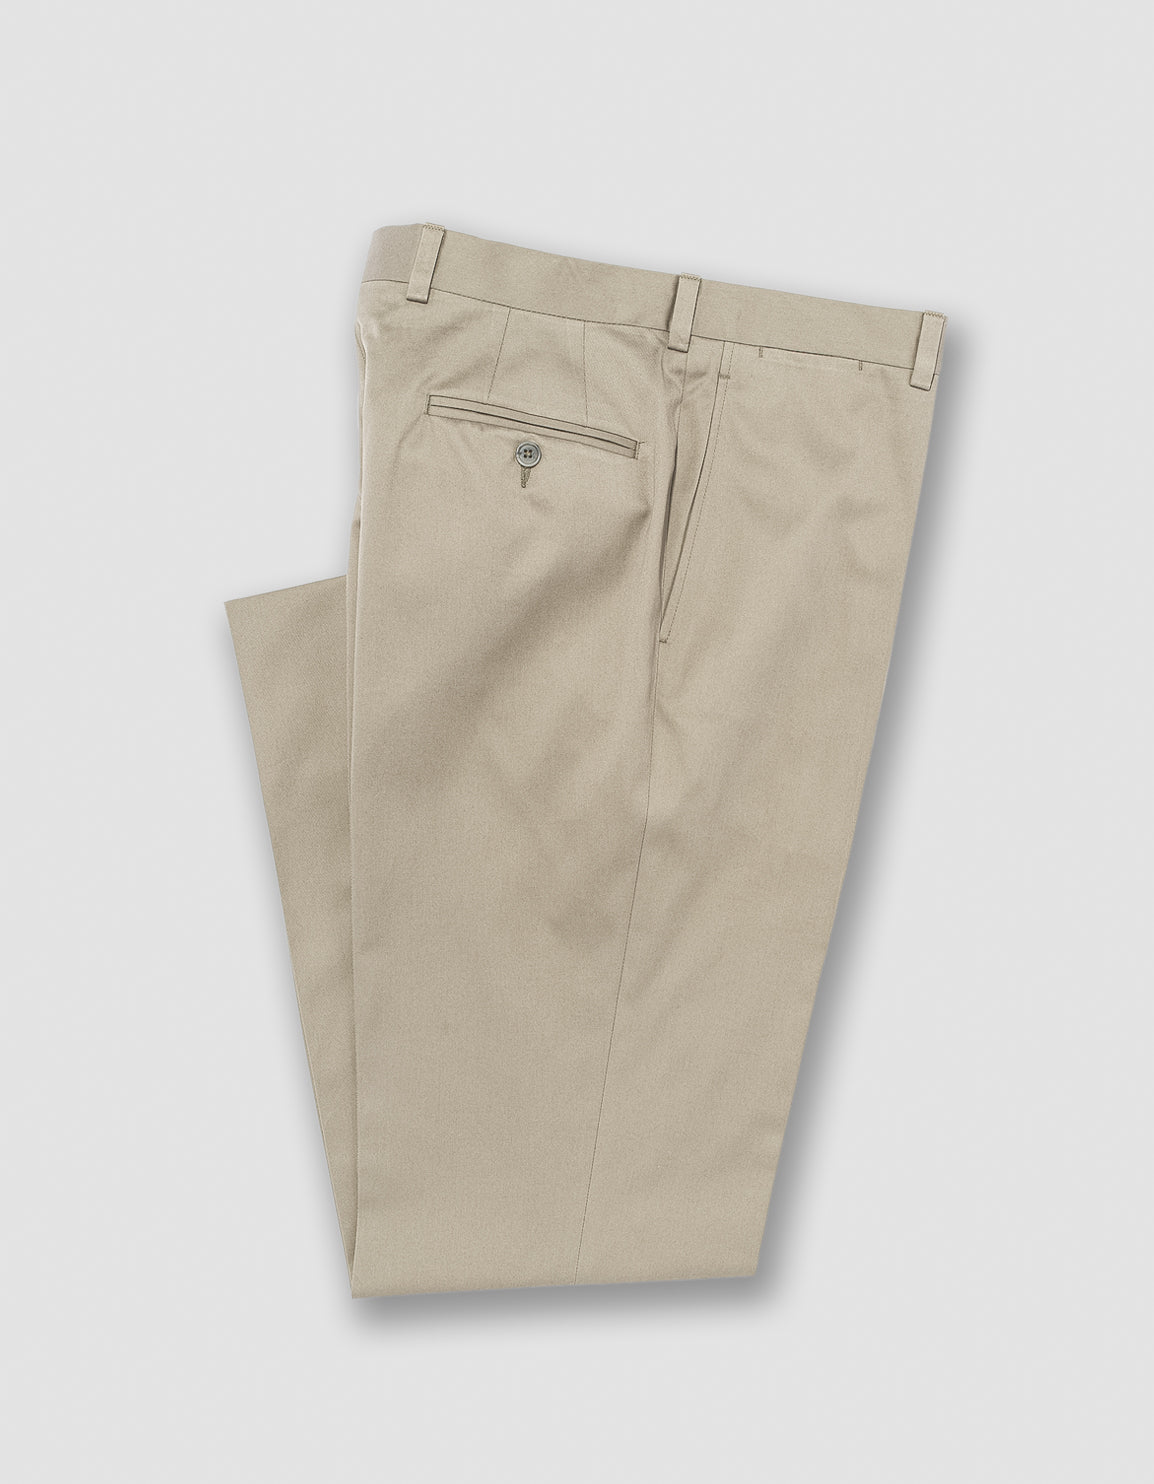 GREY COTTON DRILL CLOTH TROUSER - CLASSIC FIT